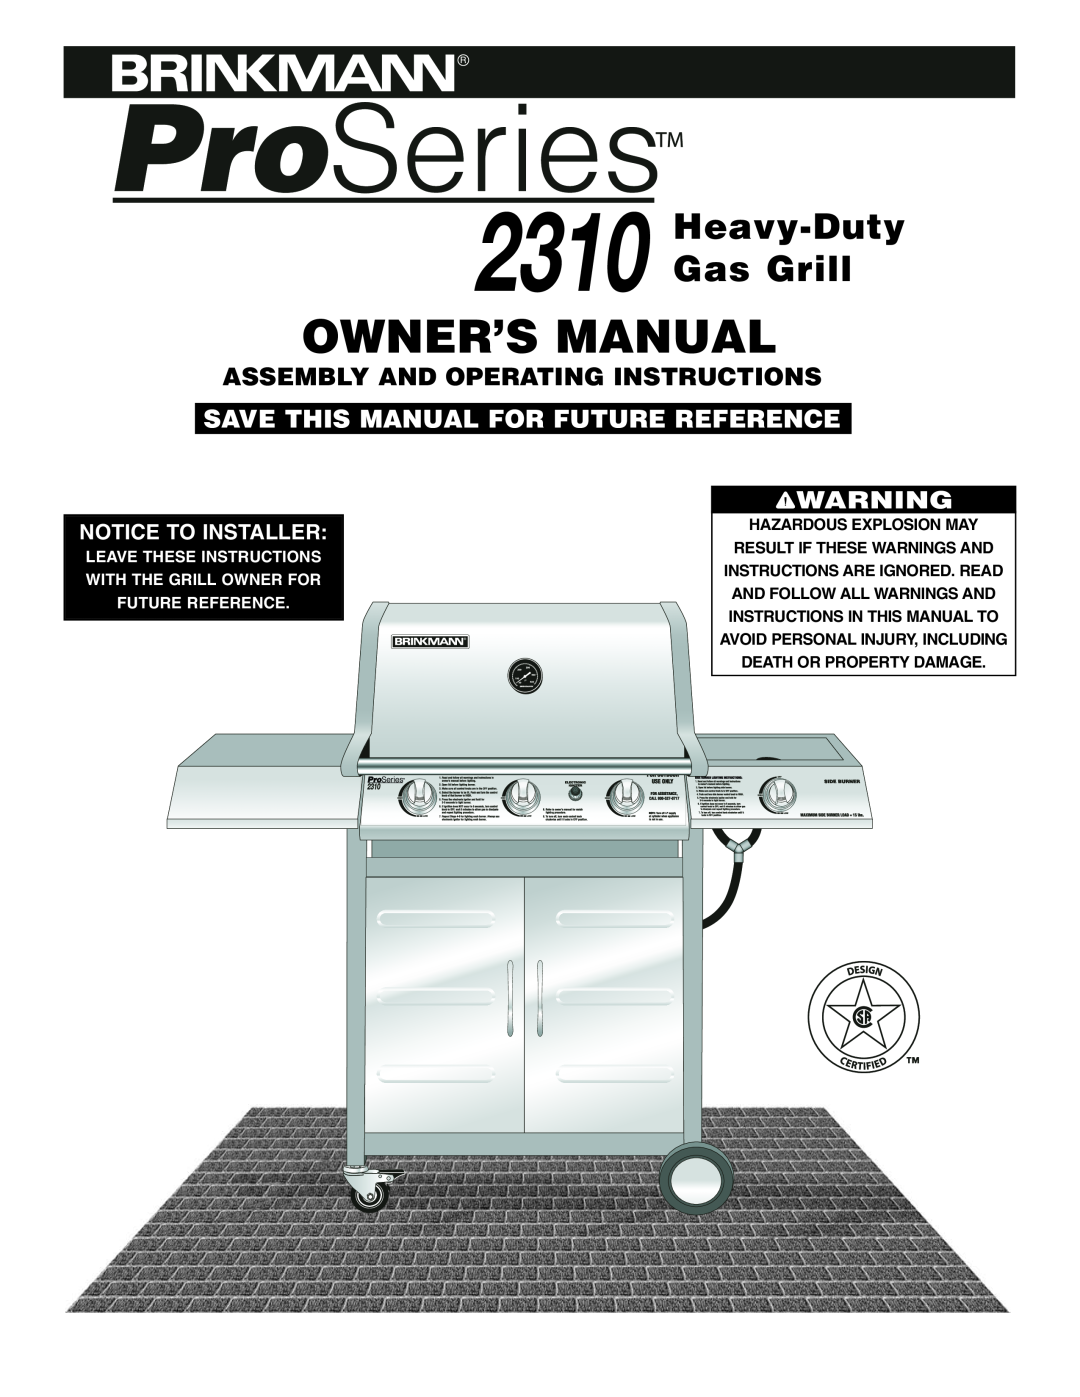 Brinkmann ProSeries 2310 owner manual Owner’S Manual, Heavy-Duty Gas Grill, Save This Manual For Future Reference 